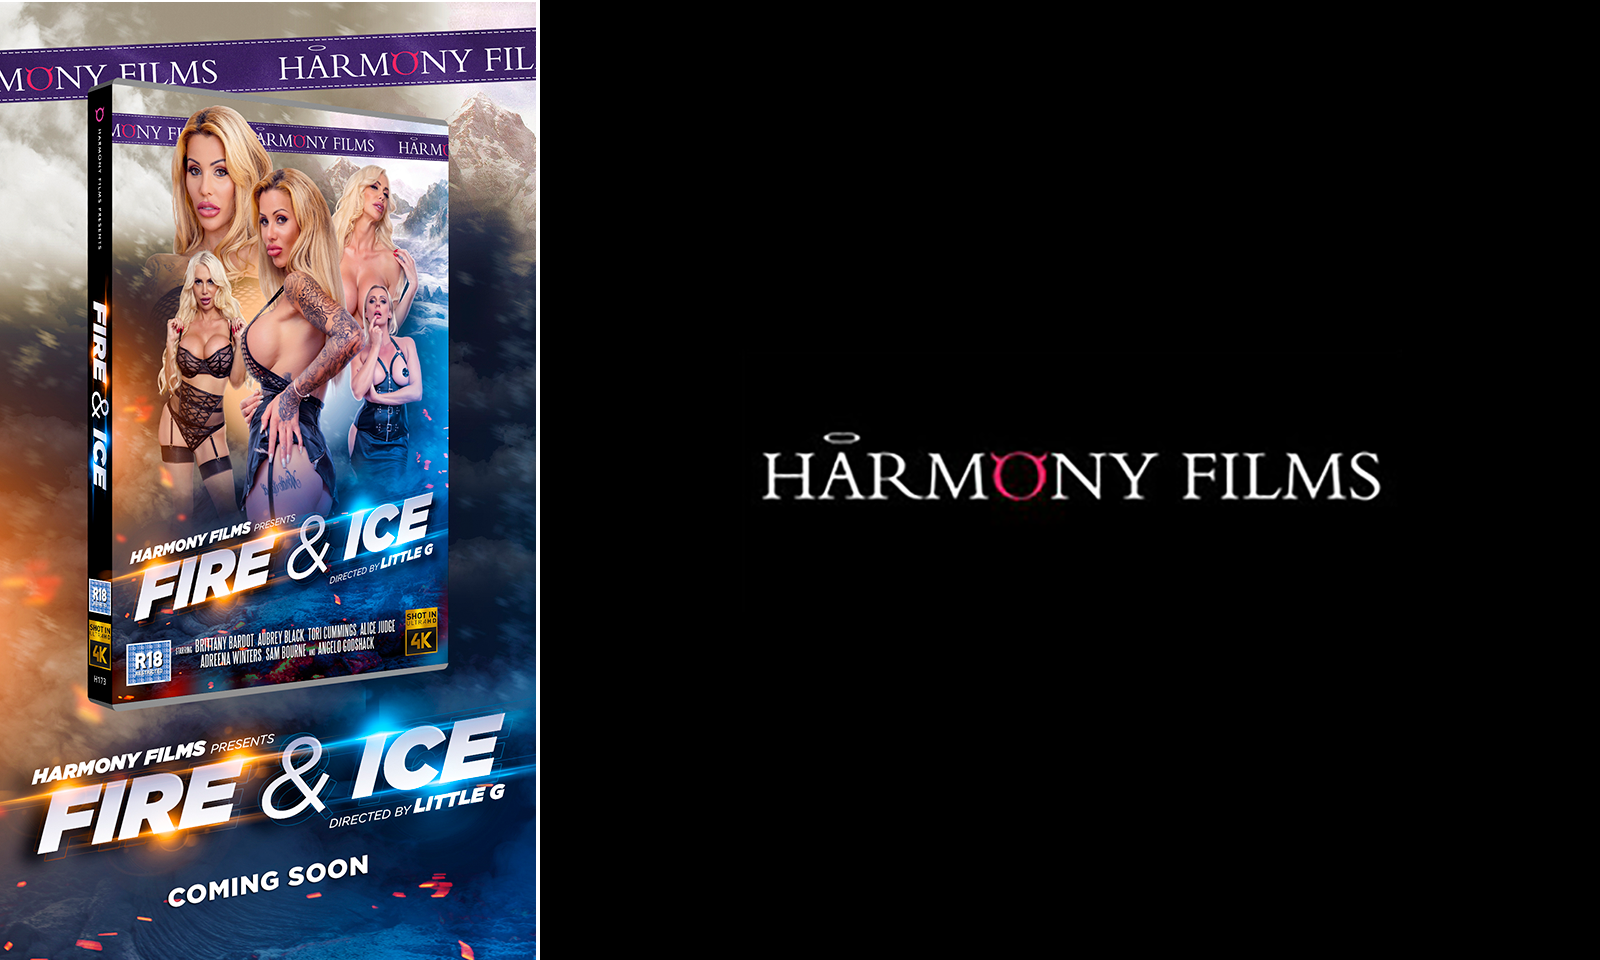 Harmony Films to Release New Title 'Fire & Ice' in April